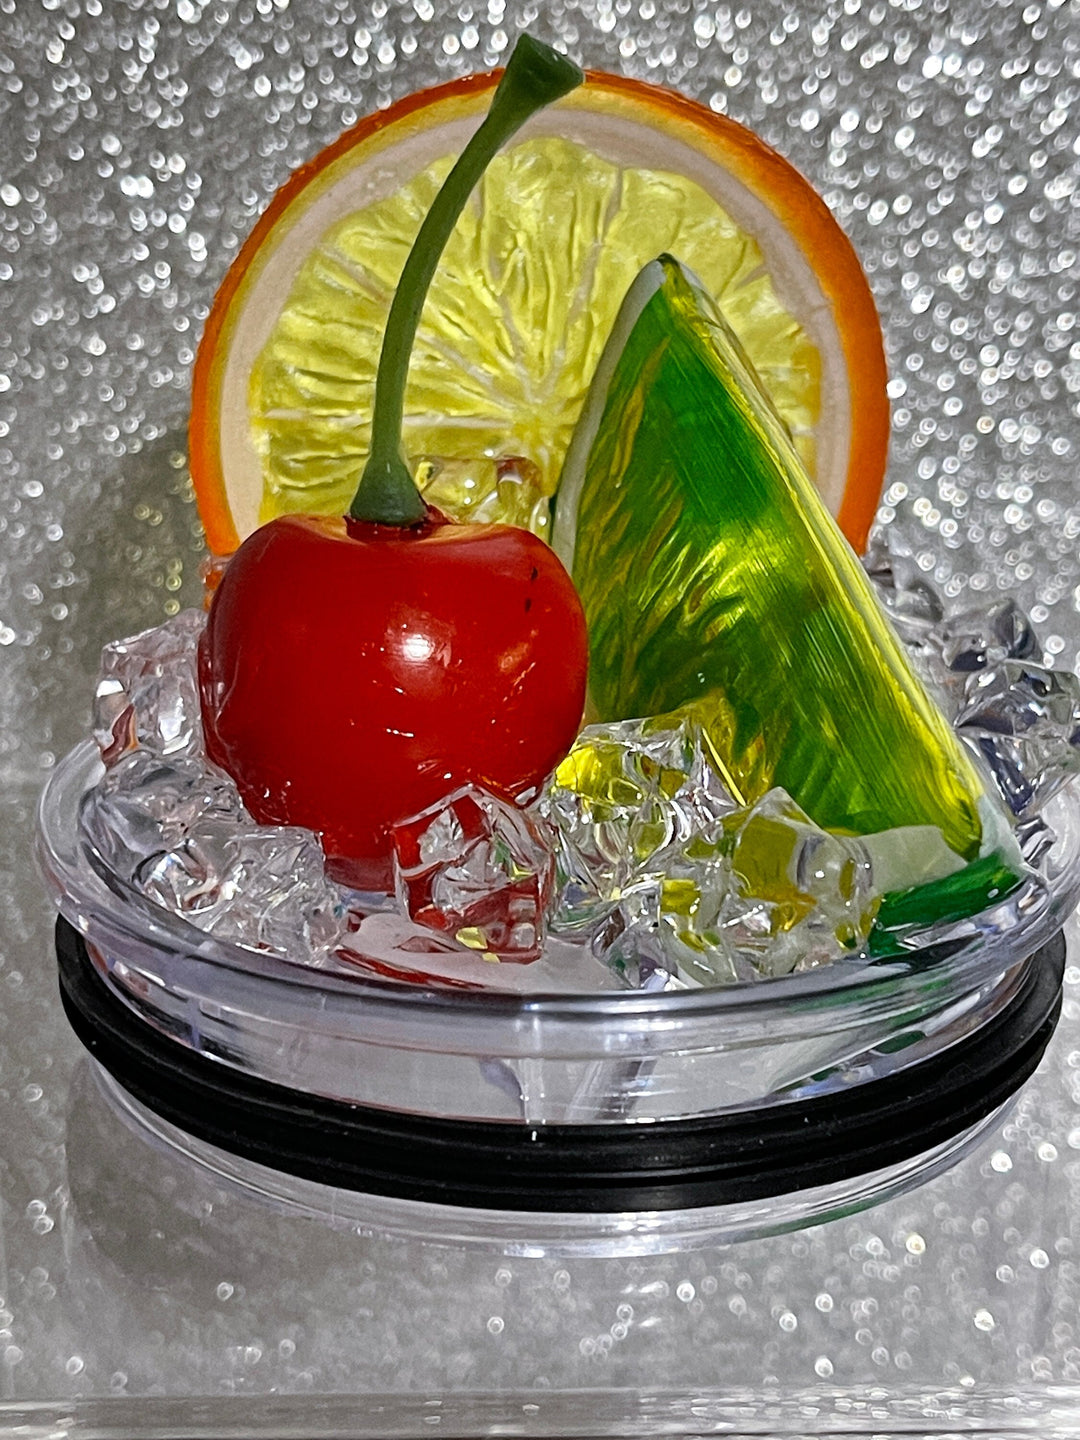 Orange Cherry Lime Fruit Tumbler Topper fits skinny straight and regular Stainless Tumbler - Fruit Topped Lid - Tumbler Toppers, unique gift